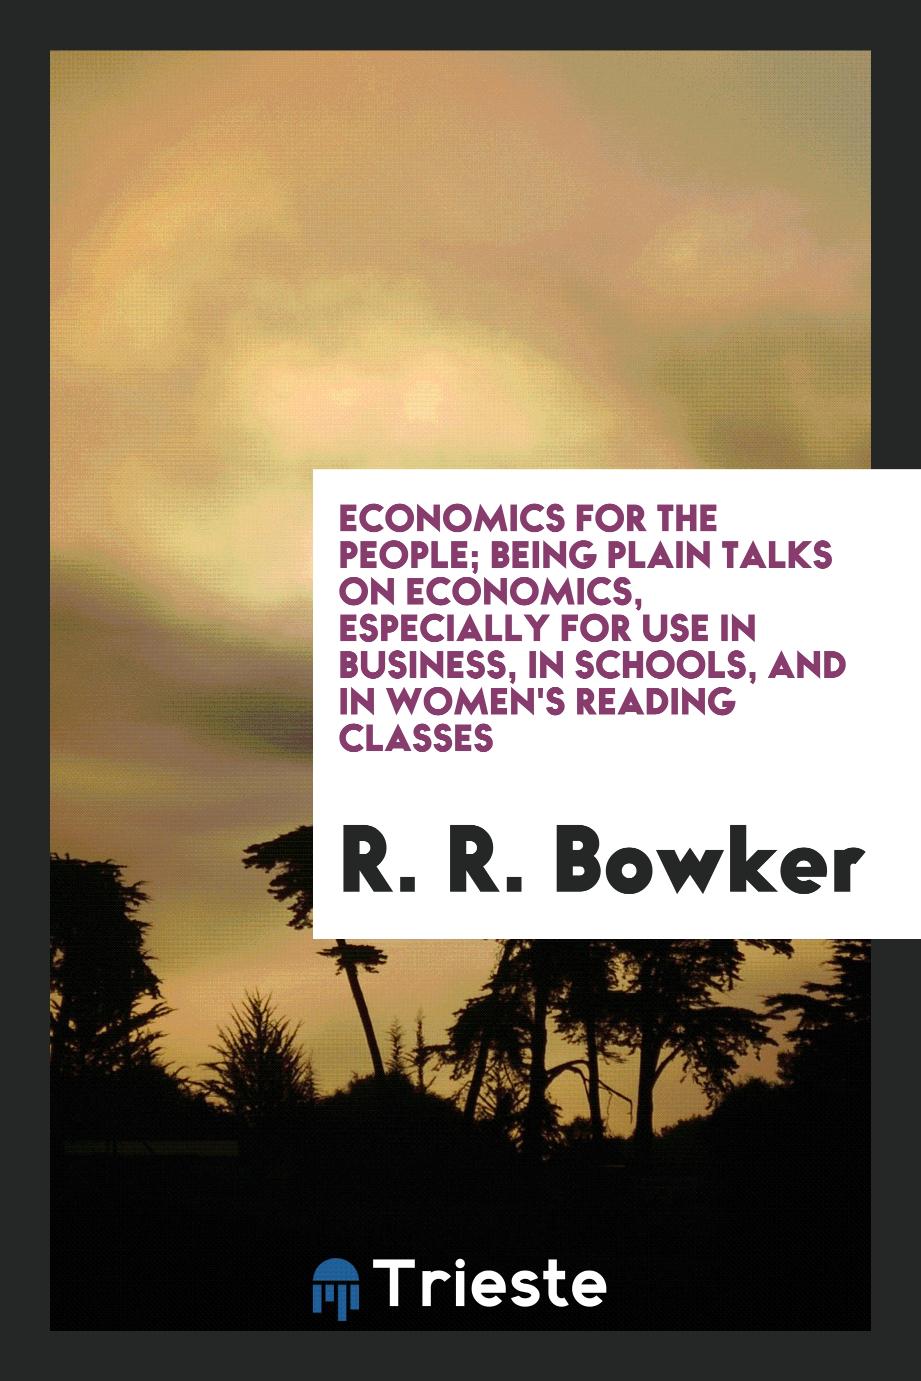 Economics for the people; being plain talks on economics, especially for use in business, in schools, and in women's reading classes